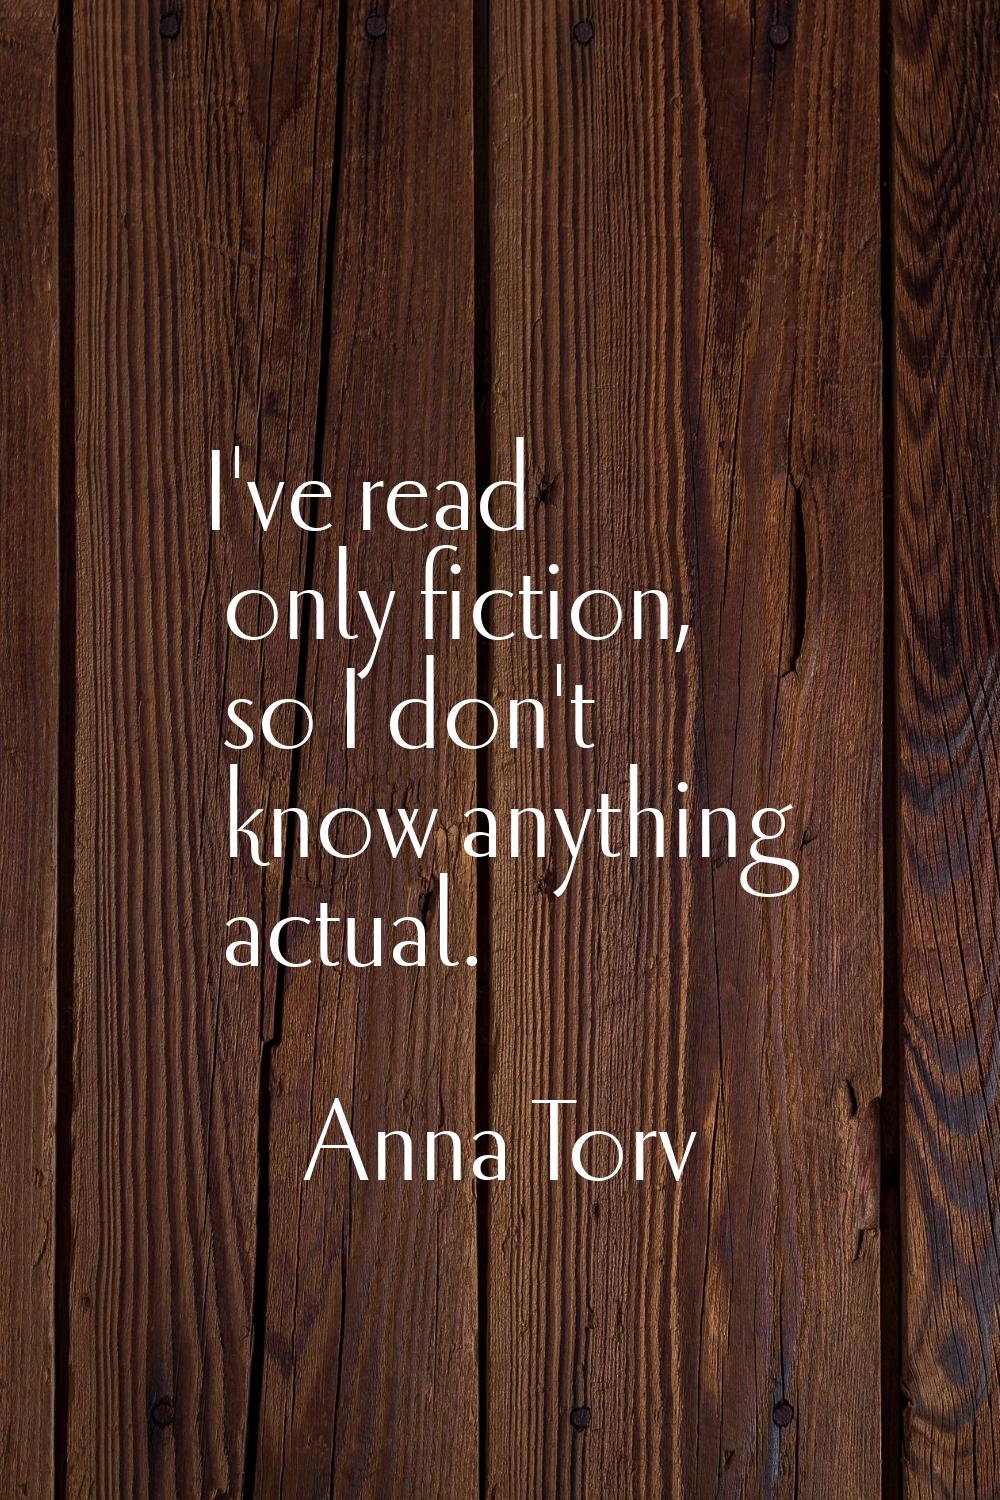 I've read only fiction, so I don't know anything actual.